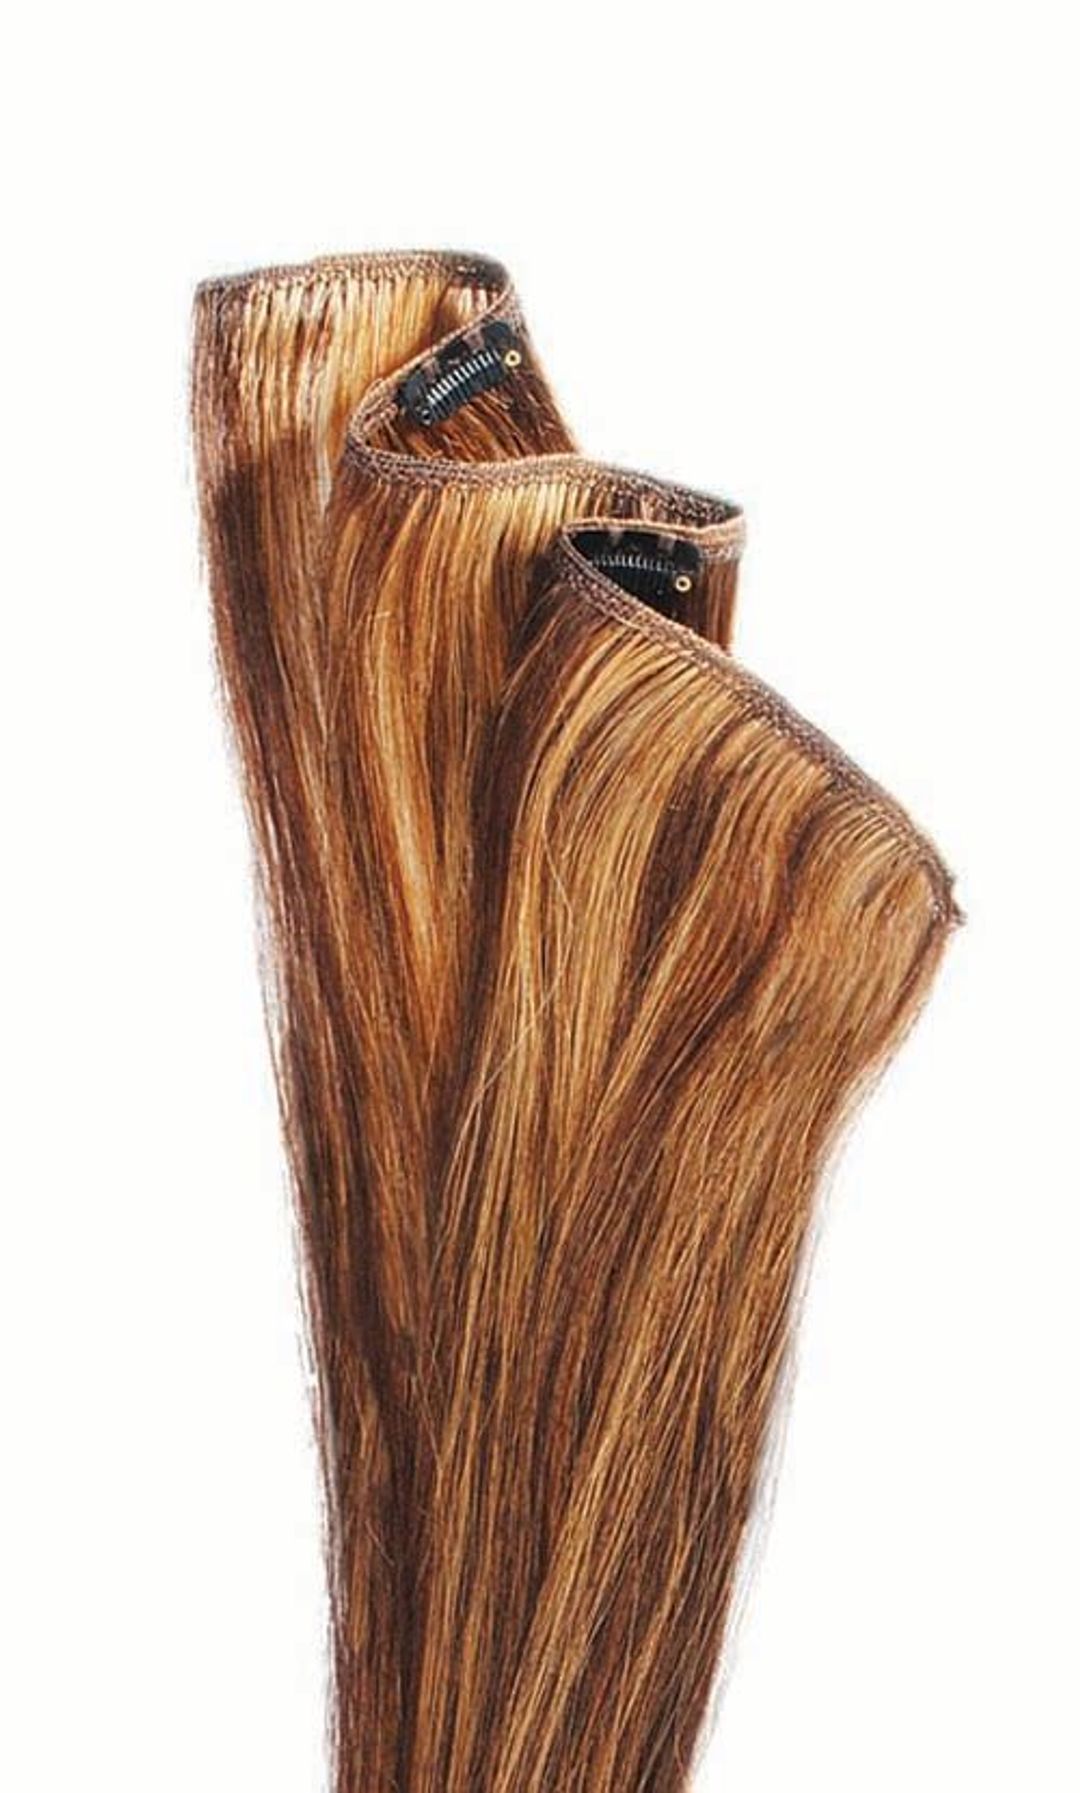 Sleek Luxury European Weave Indian Hair 1Pc Clips In - Ash Brown With Blonde Mix,18"